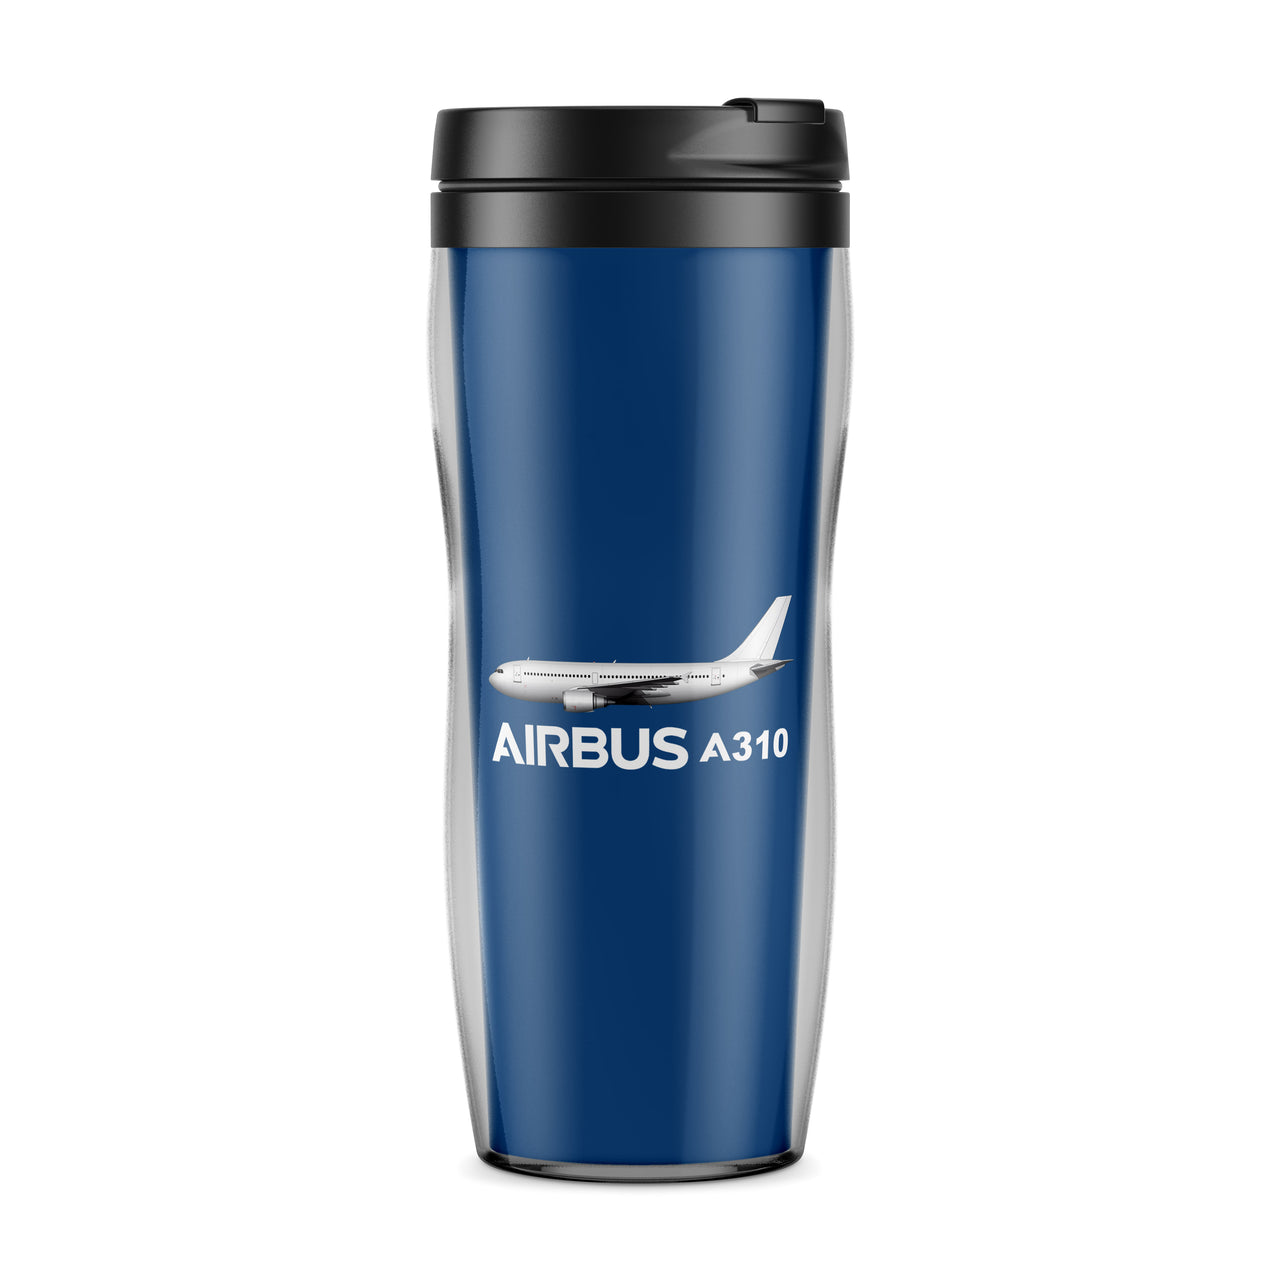 The Airbus A310 Designed Travel Mugs